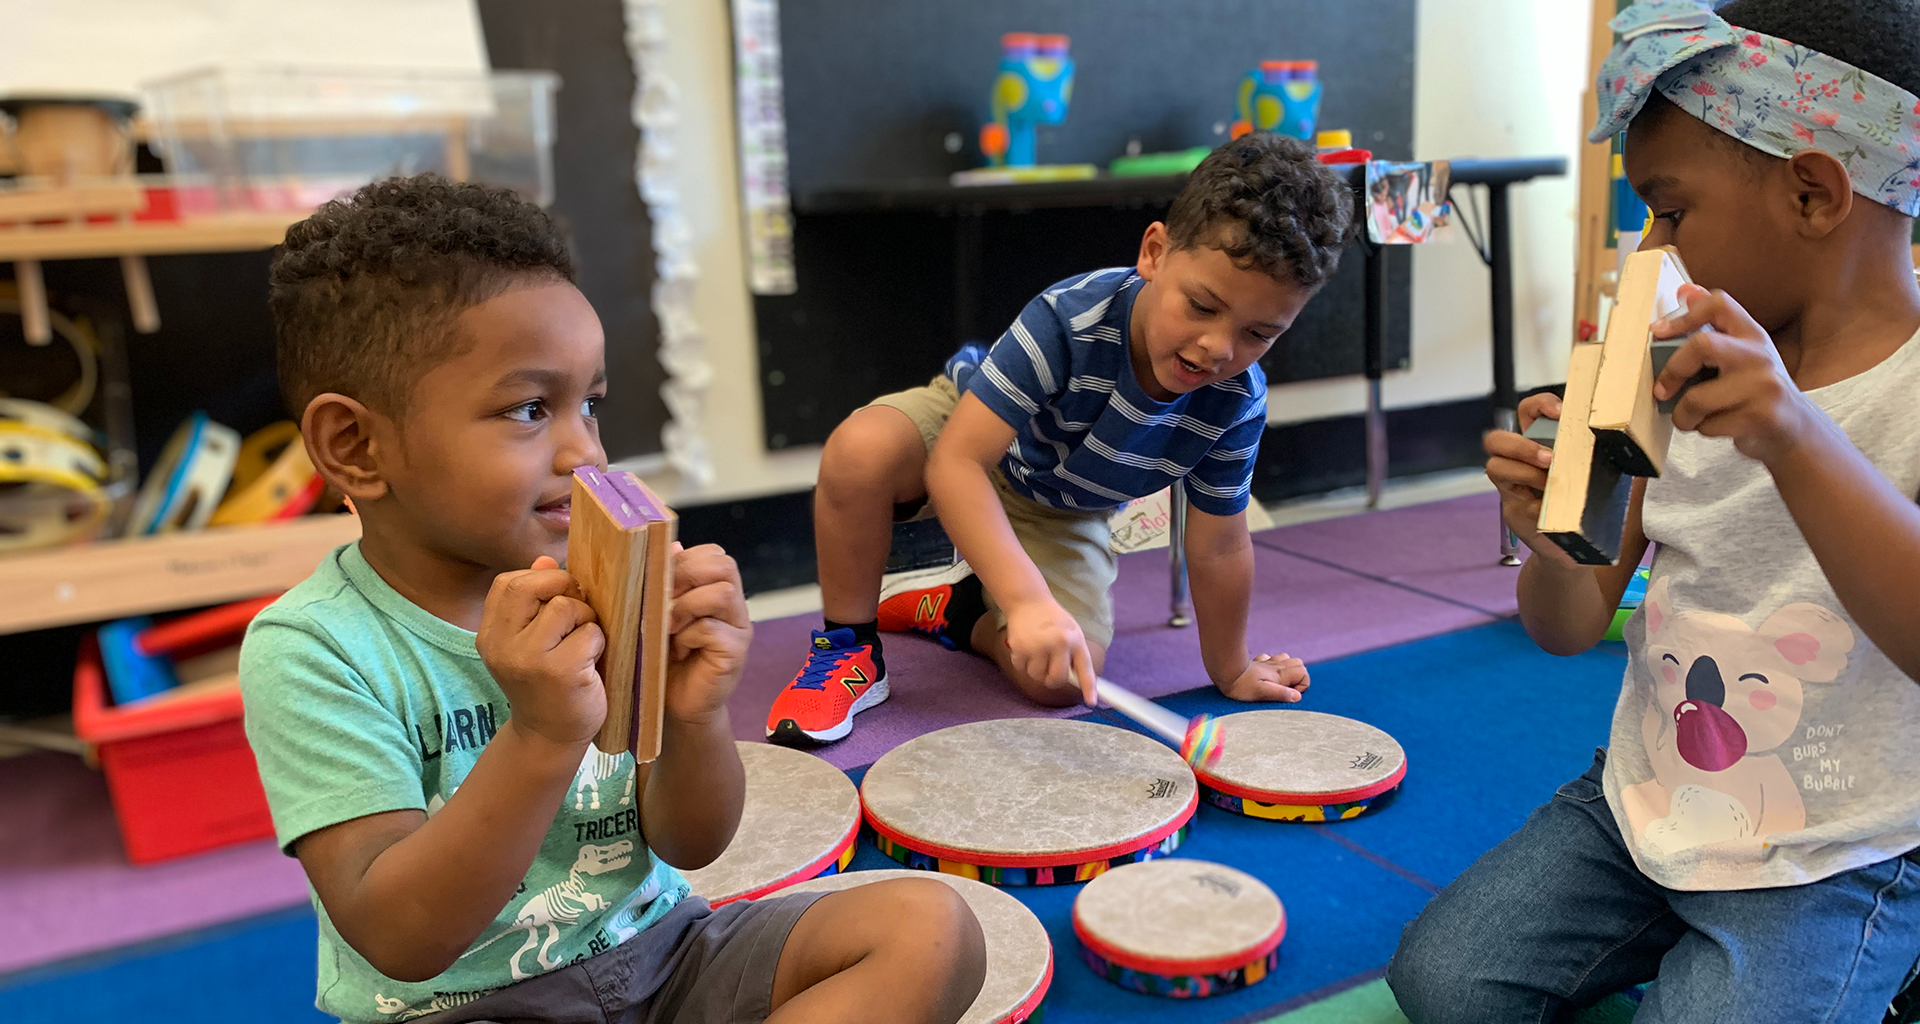 Three students playing with instruments in the classroom